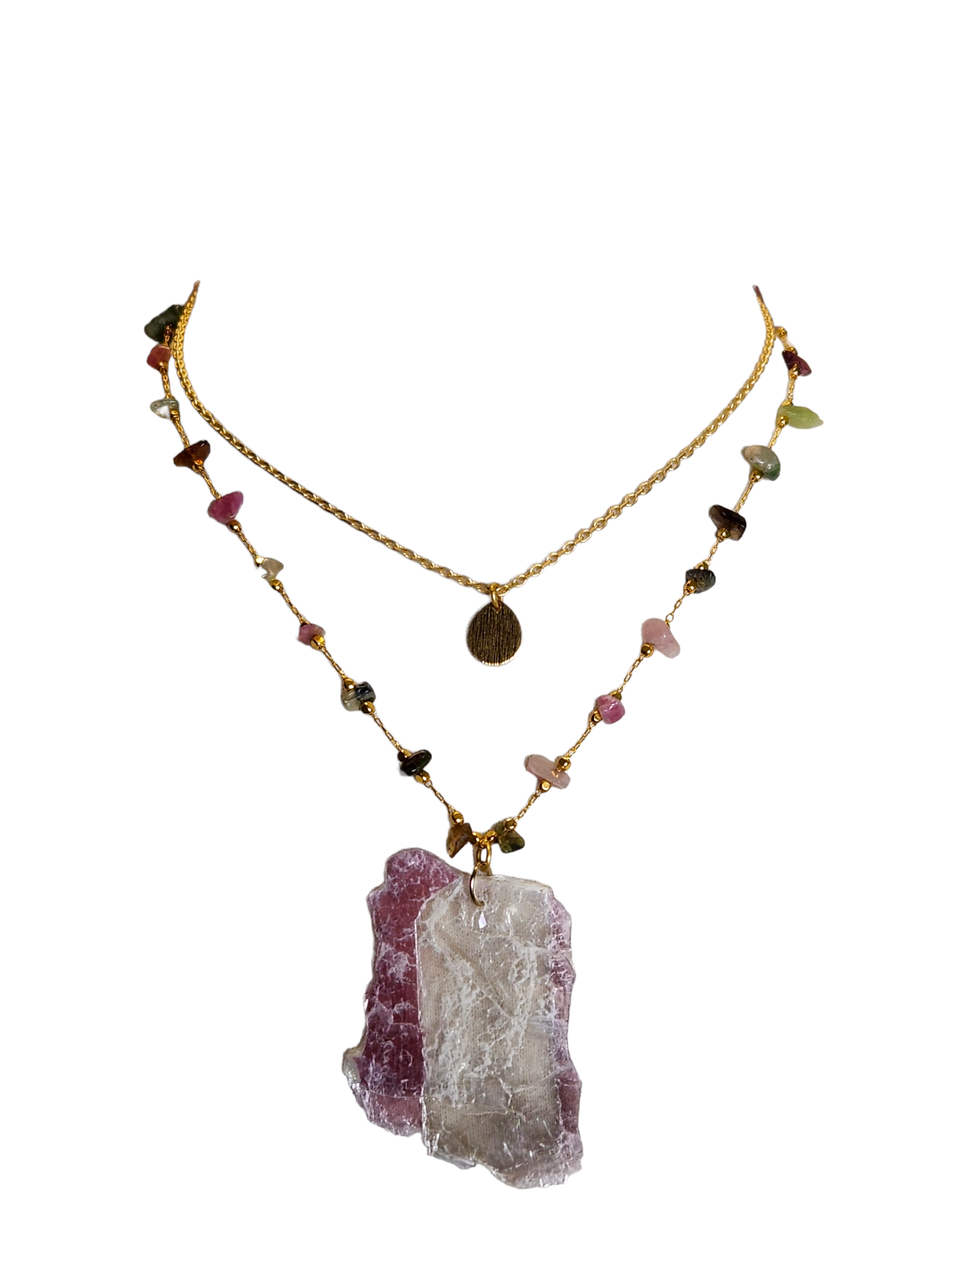 The Micah Layered Tourmaline Necklace Collection